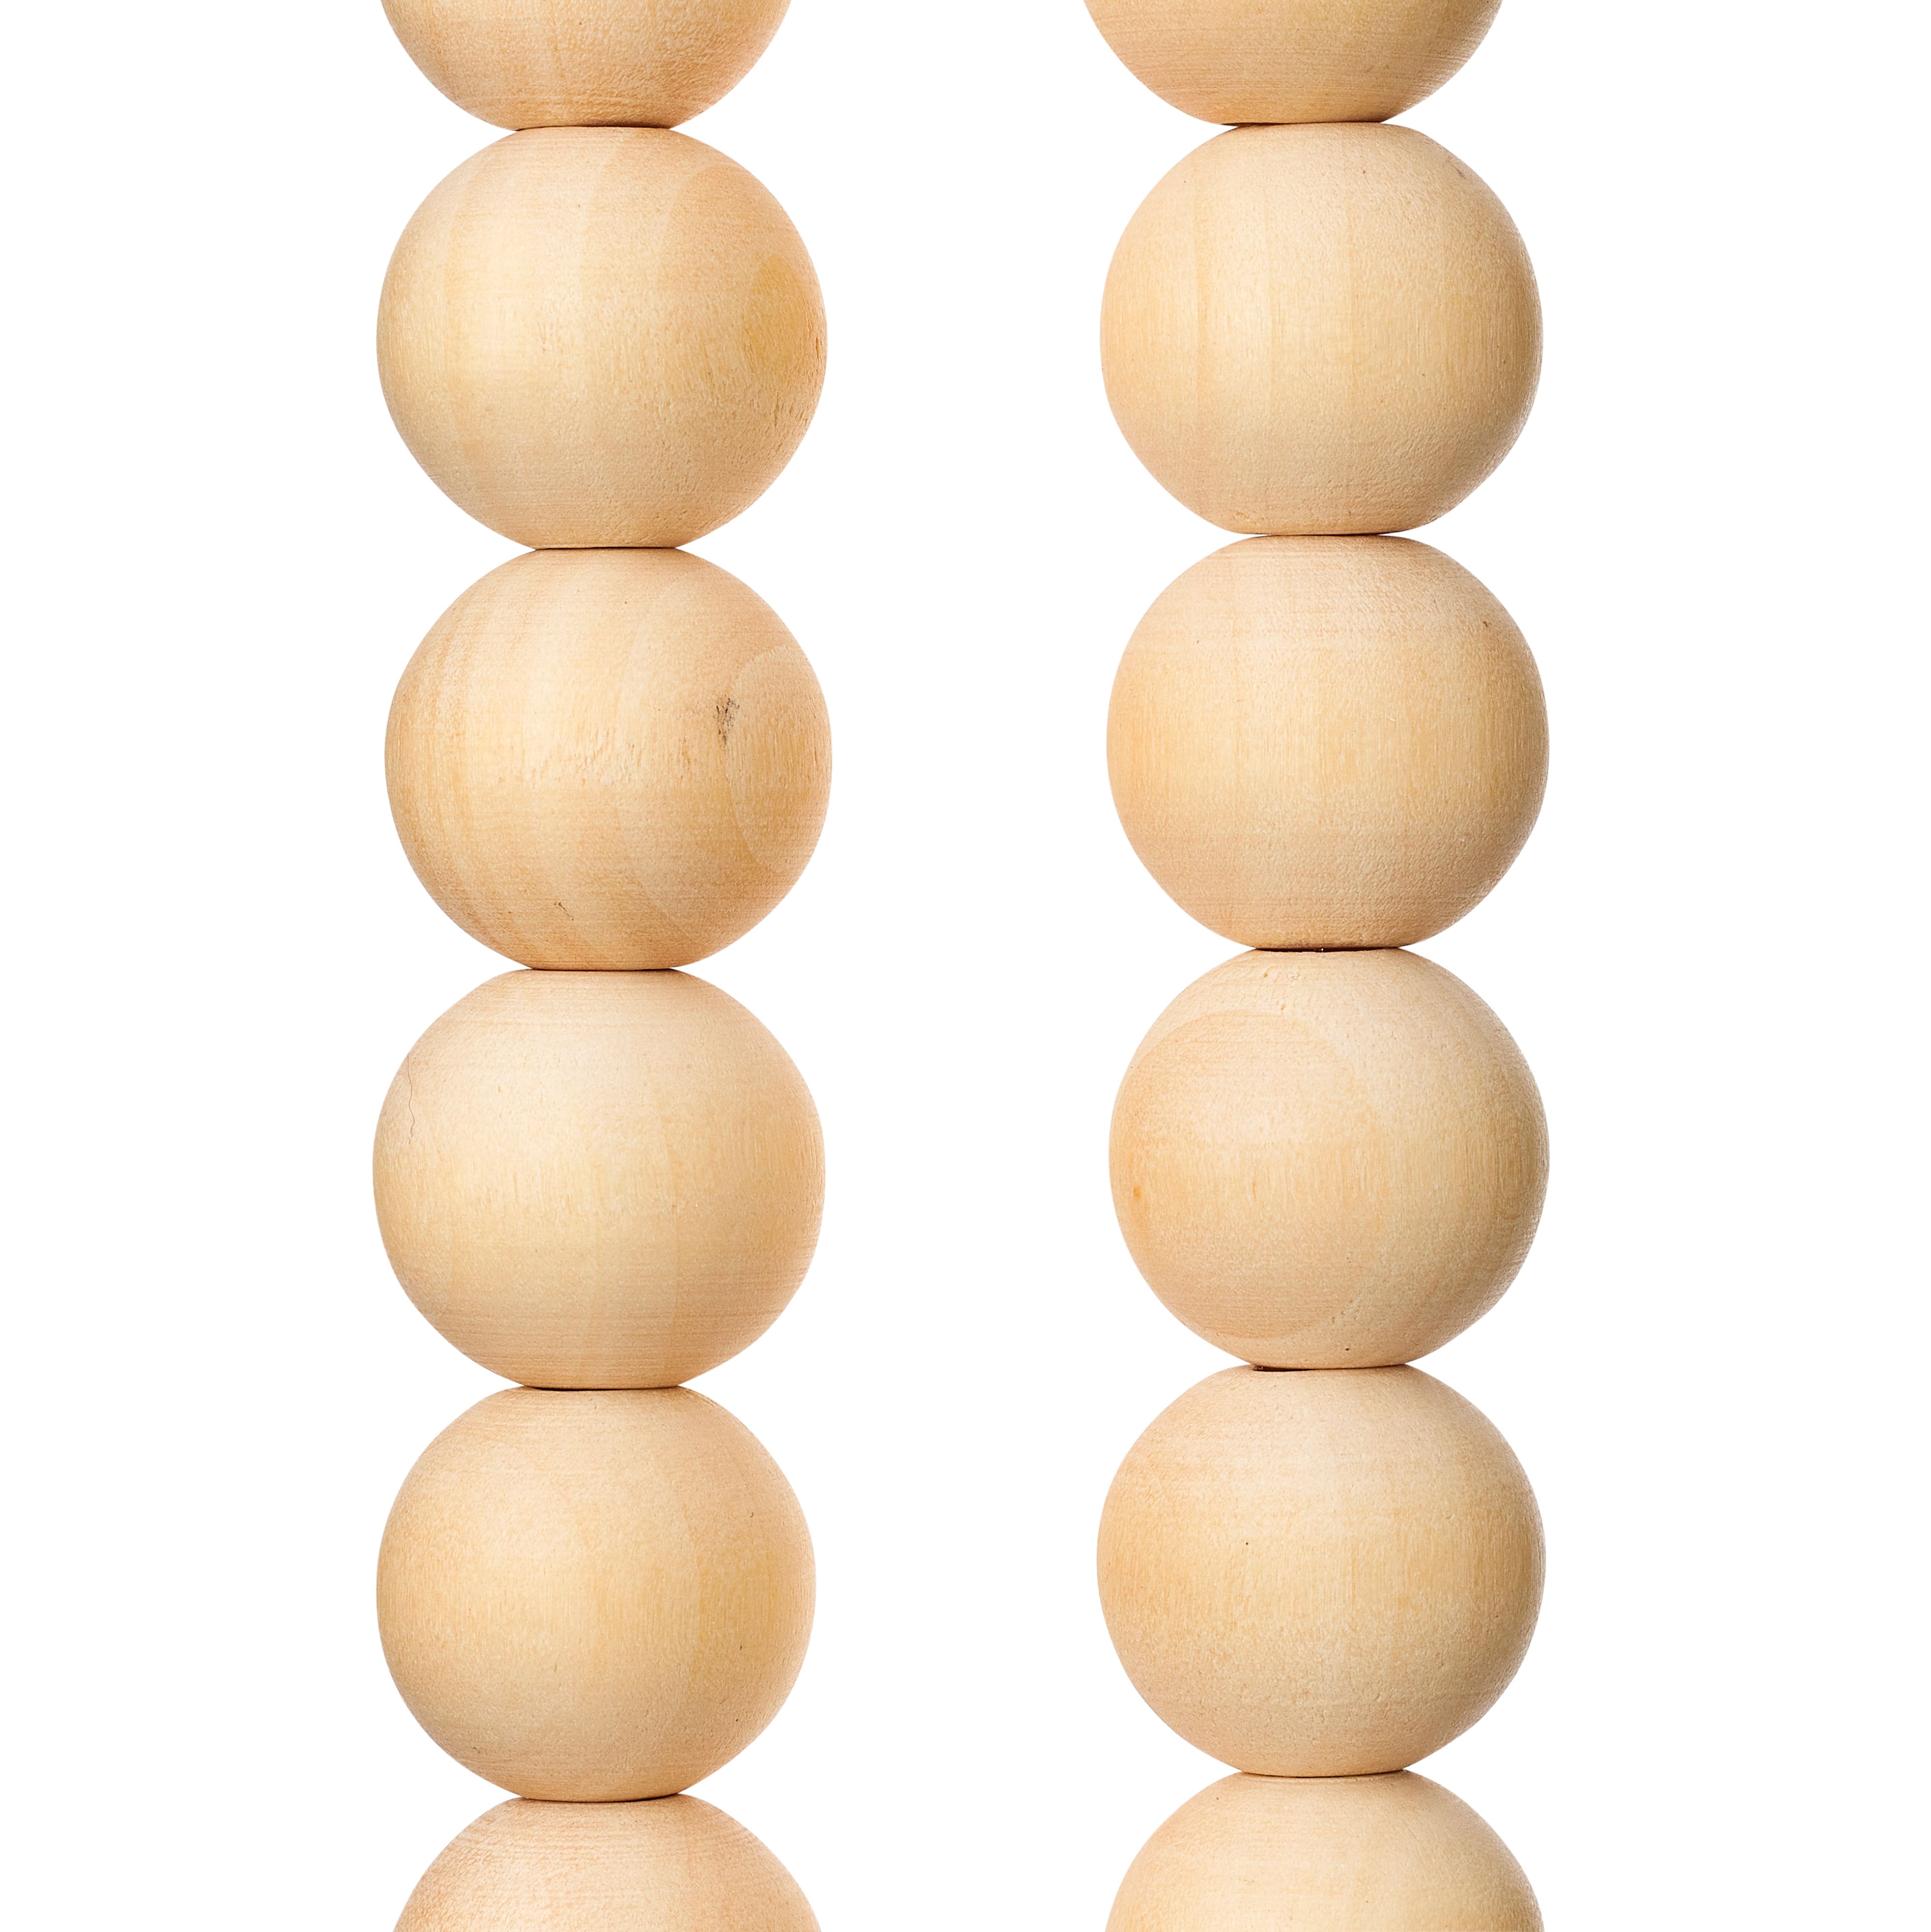 Natural Wooden Round Beads, 15mm by Bead Landing | Michaels